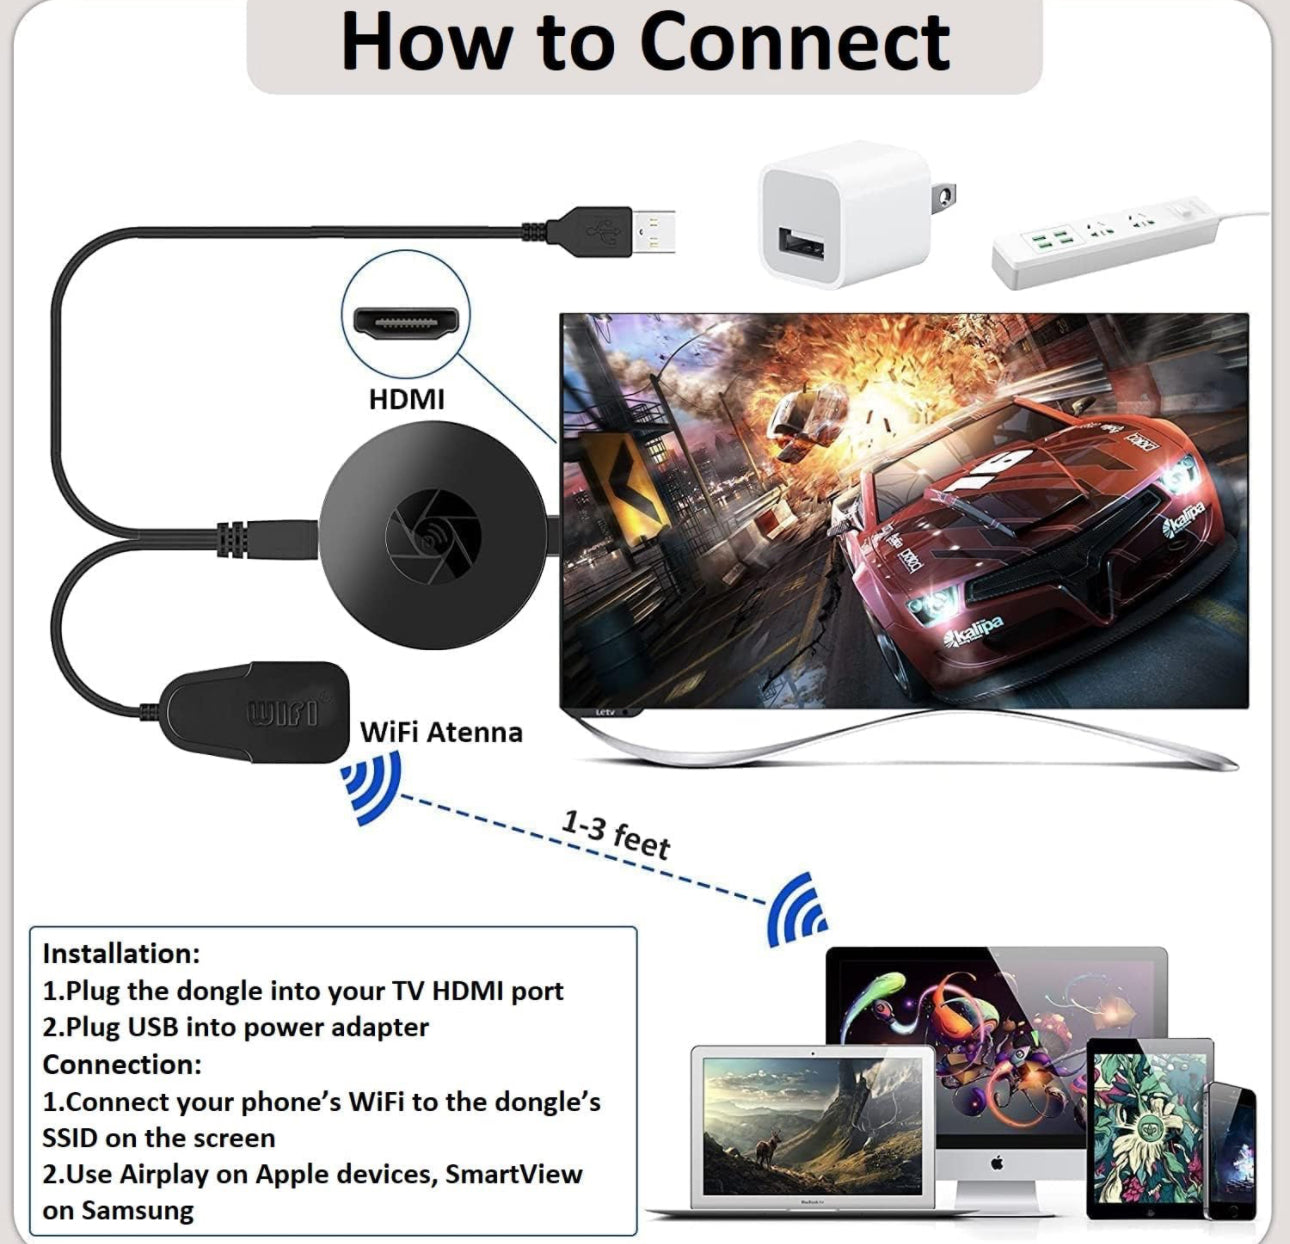 SmartSee Wireless HDMI Display Adapter WiFi Screen Cast Mirroring Media Streaming Dongle Receiver for Phone/PC/Tablet to HD Display TV Projector